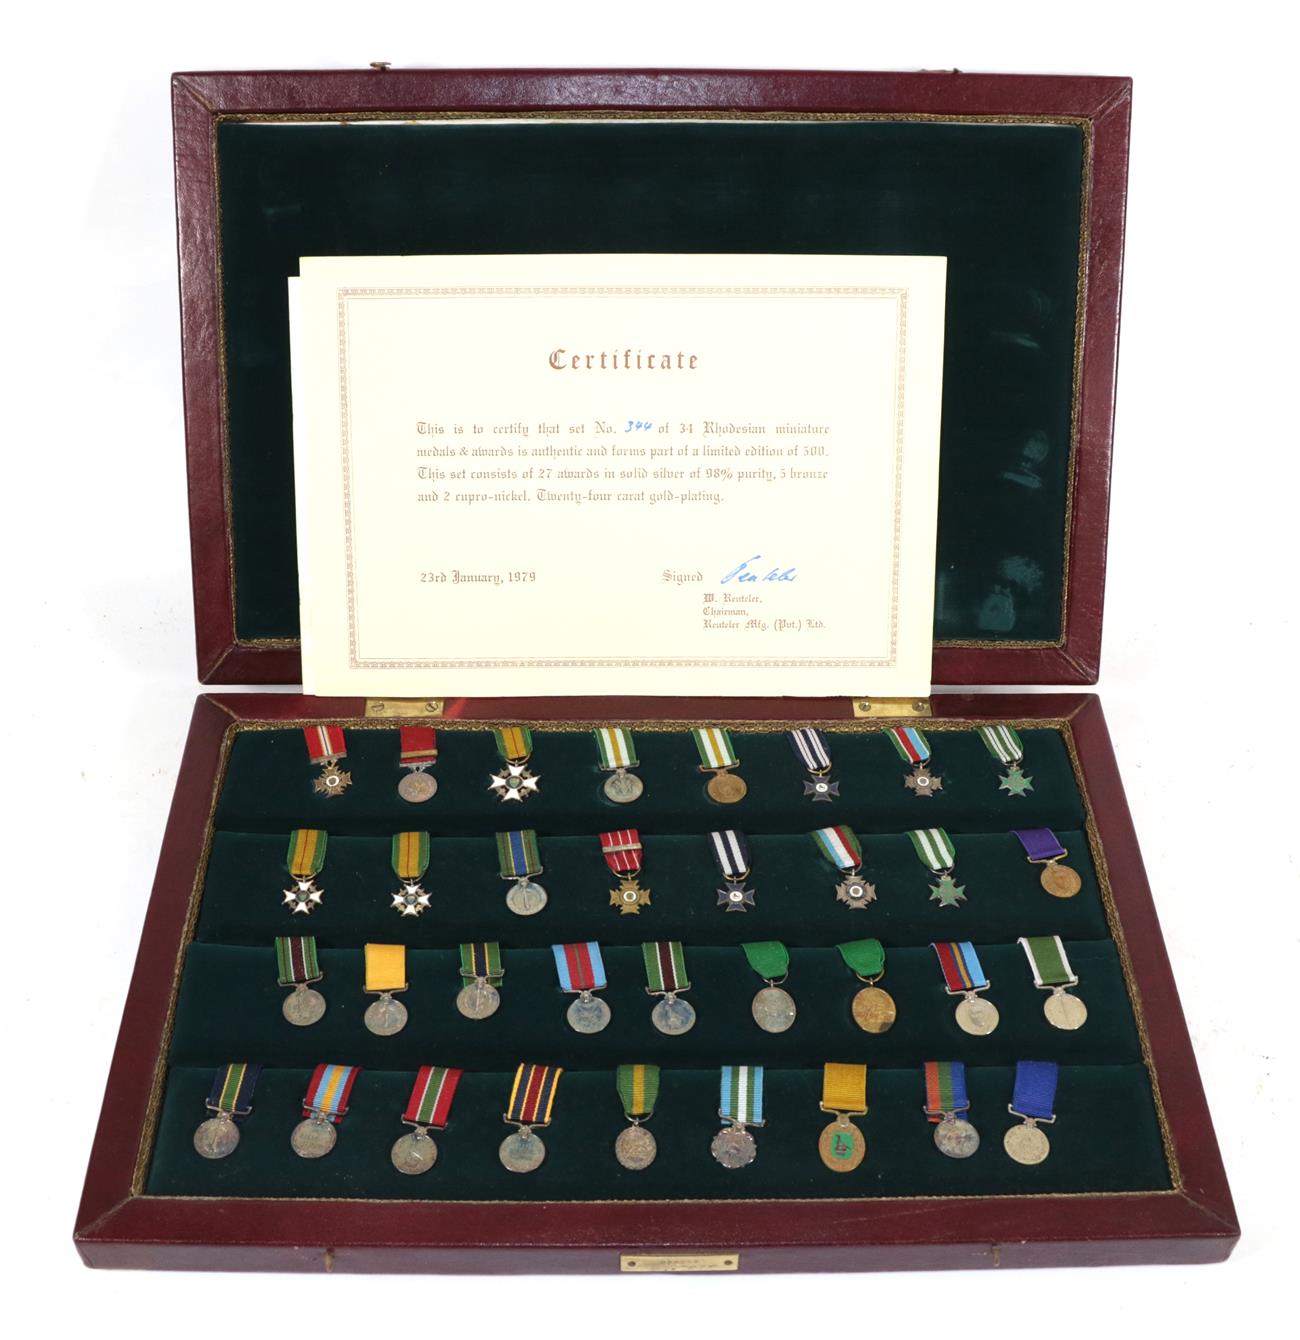 Lot 6 - A Commemorative Set of Thirty Four Rhodesian Miniature Medals and Awards, twenty seven in solid...